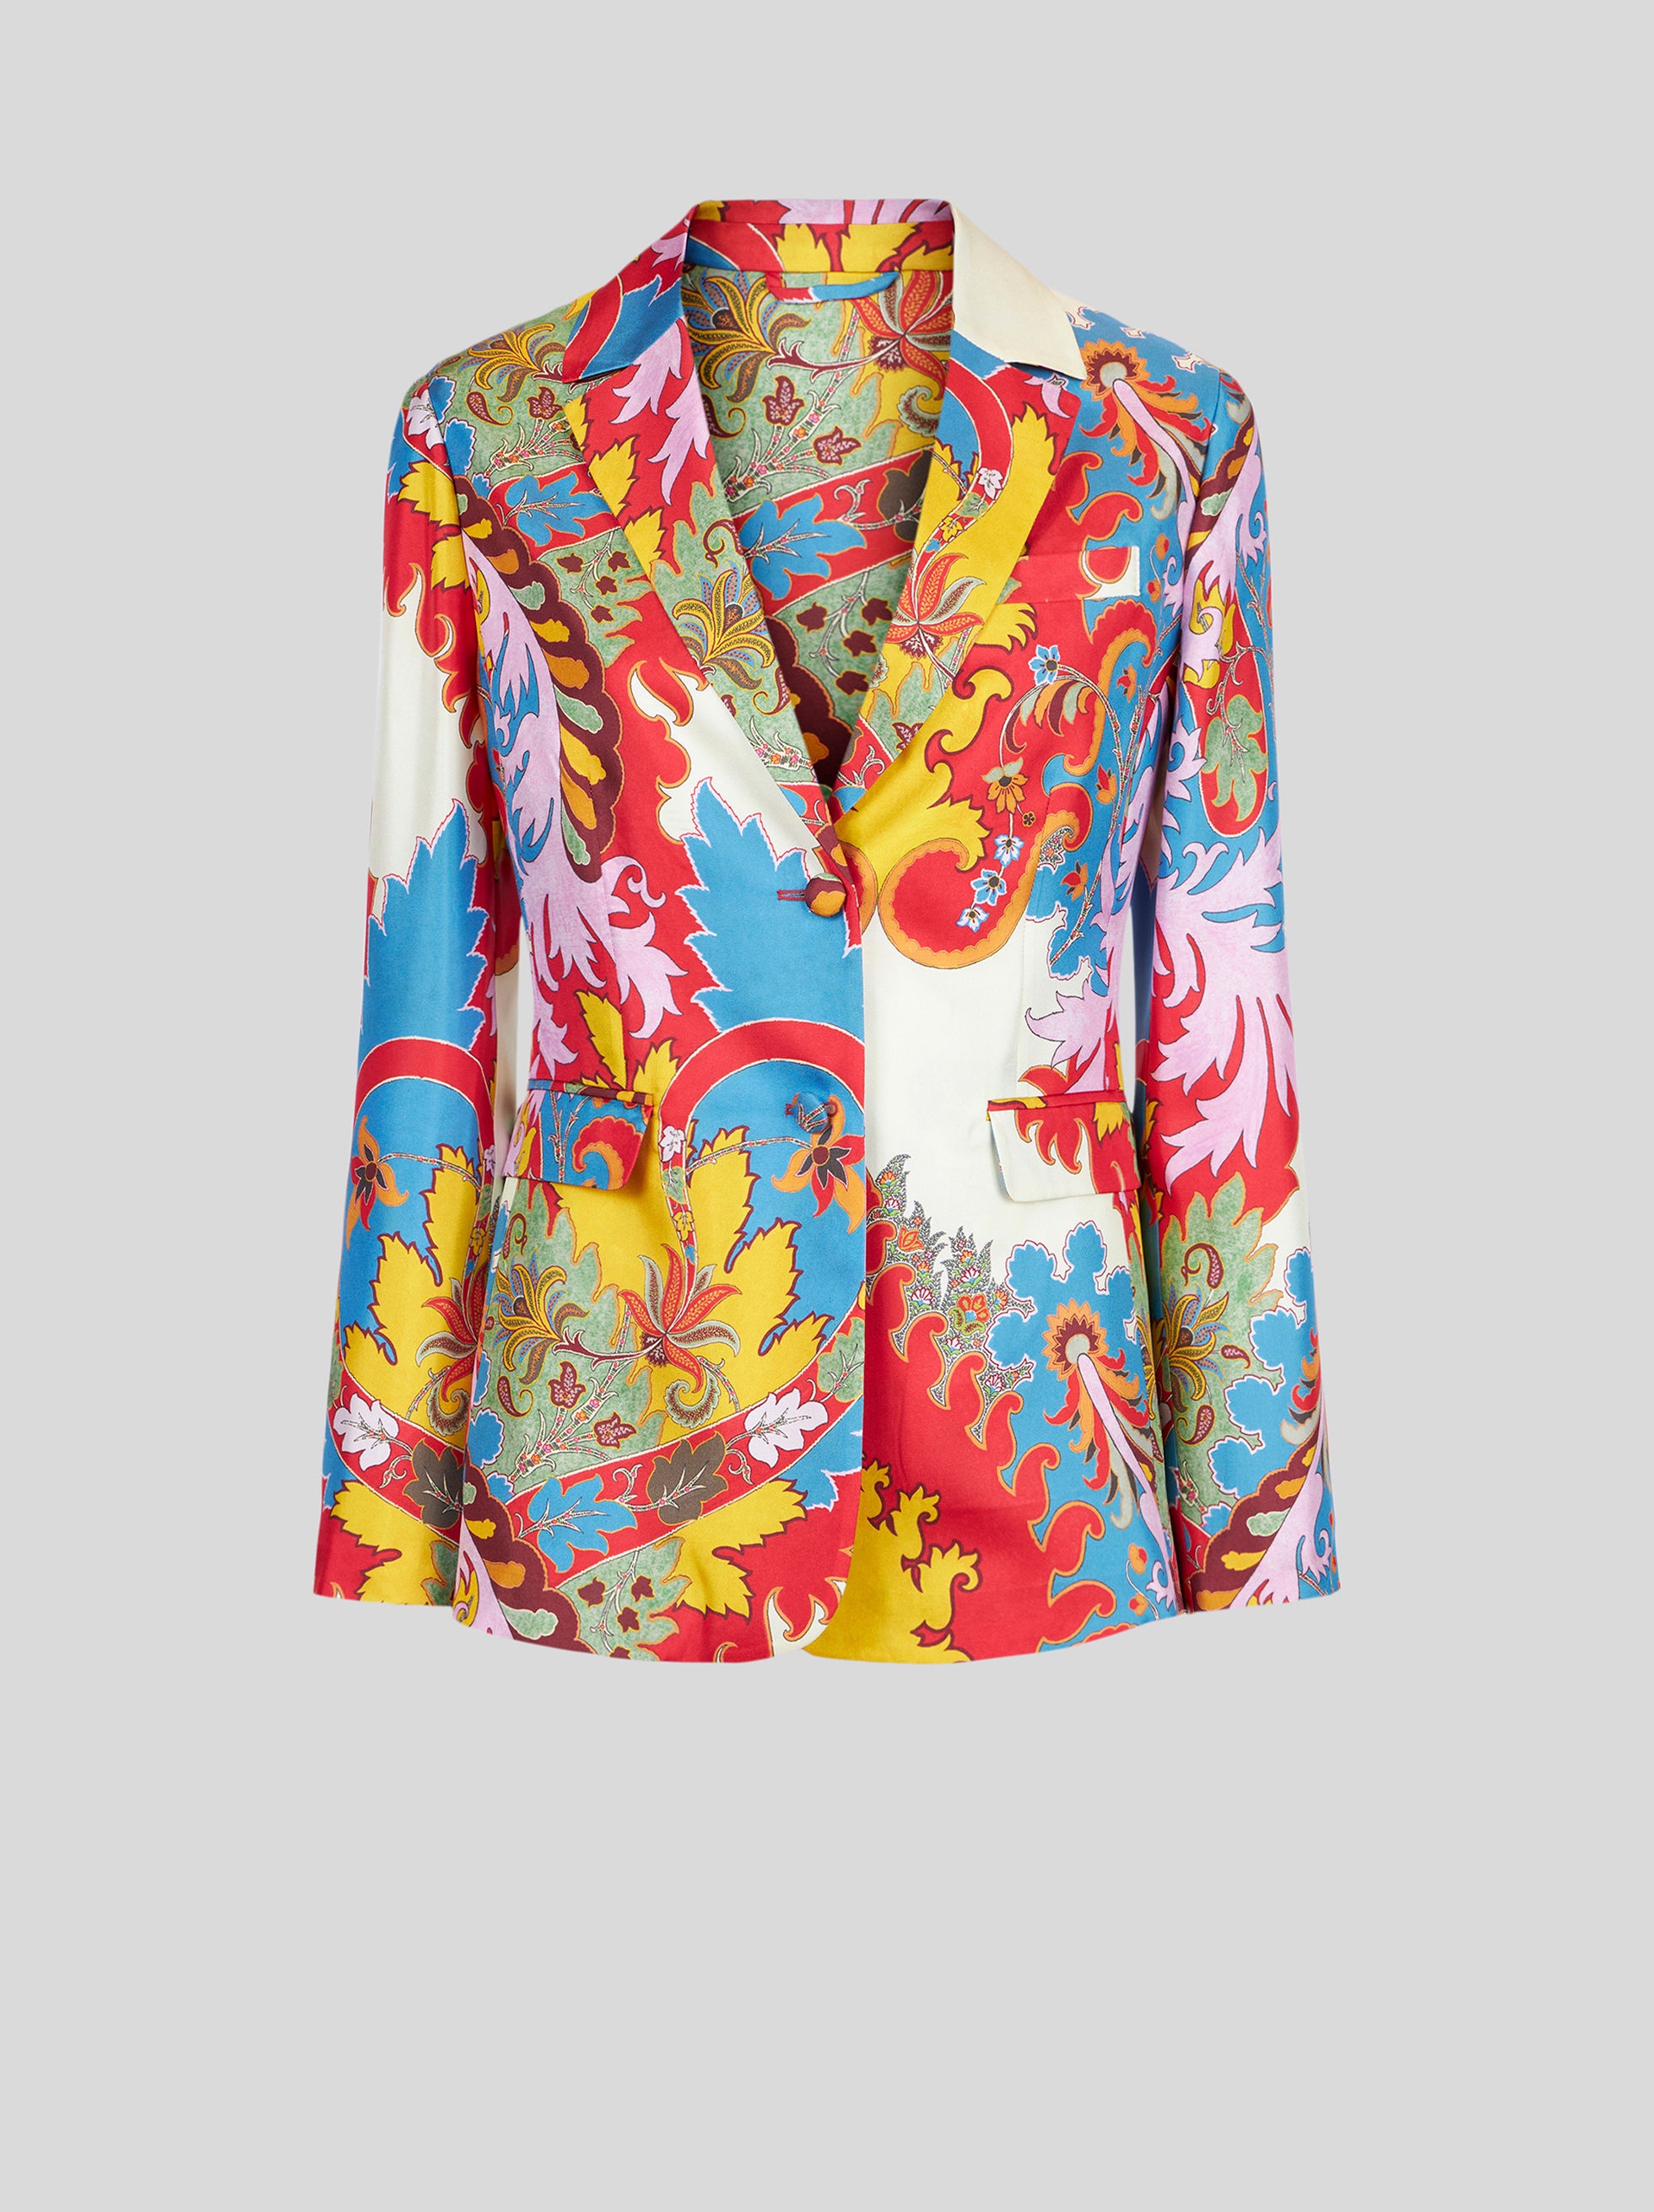 ETRO Paisley-butterfly single-breasted blazer - Blue